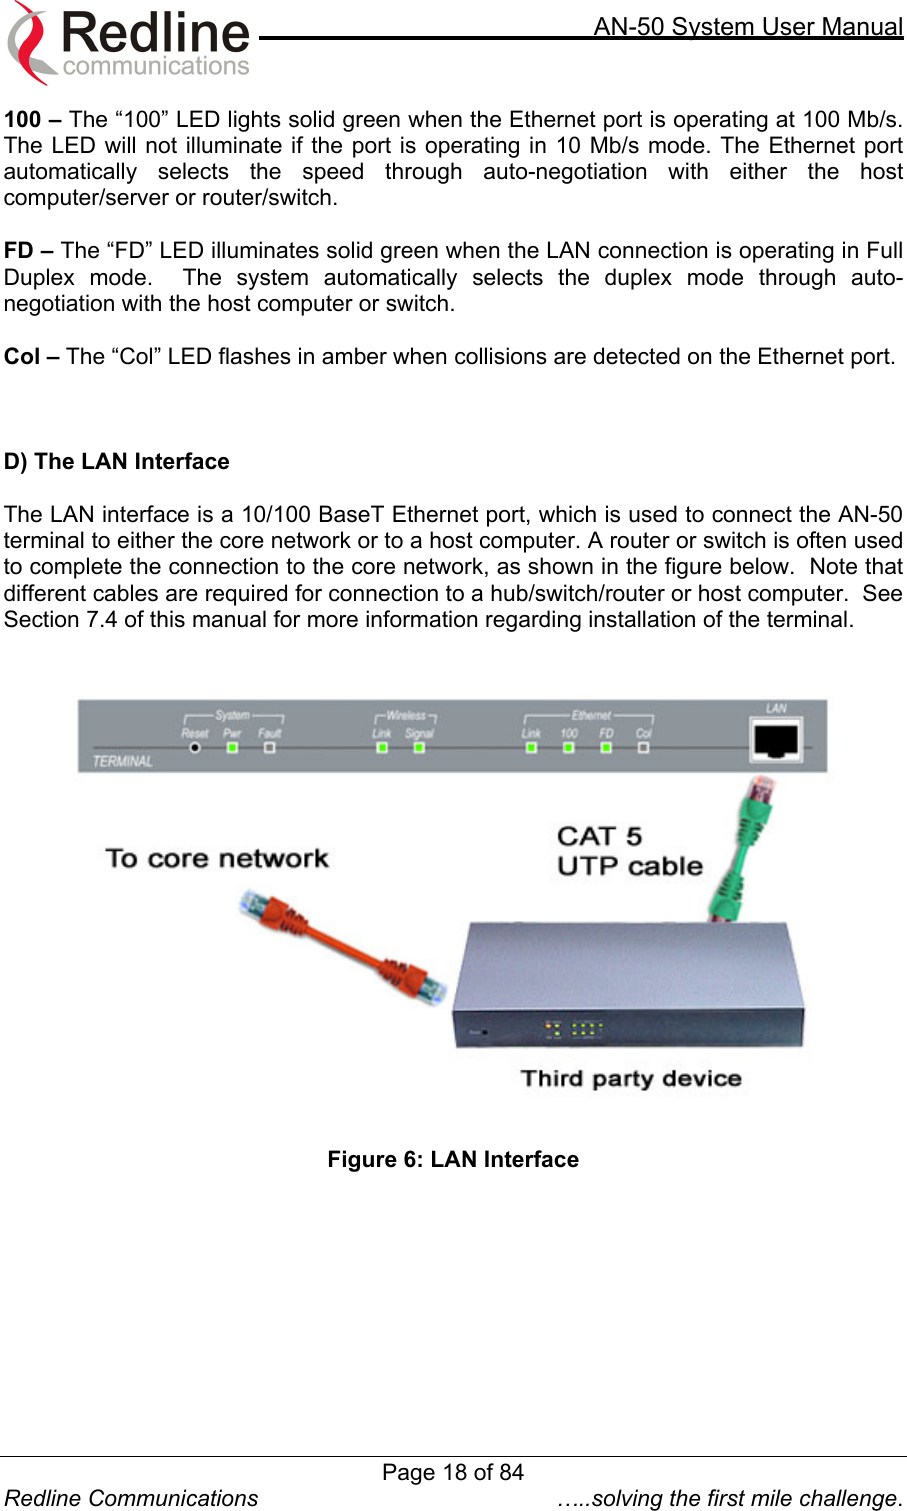     AN-50 System User Manual  Redline Communications  …..solving the first mile challenge. 100 – The “100” LED lights solid green when the Ethernet port is operating at 100 Mb/s.  The LED will not illuminate if the port is operating in 10 Mb/s mode. The Ethernet port automatically selects the speed through auto-negotiation with either the host computer/server or router/switch.  FD – The “FD” LED illuminates solid green when the LAN connection is operating in Full Duplex mode.  The system automatically selects the duplex mode through auto-negotiation with the host computer or switch.    Col – The “Col” LED flashes in amber when collisions are detected on the Ethernet port.      D) The LAN Interface  The LAN interface is a 10/100 BaseT Ethernet port, which is used to connect the AN-50 terminal to either the core network or to a host computer. A router or switch is often used to complete the connection to the core network, as shown in the figure below.  Note that different cables are required for connection to a hub/switch/router or host computer.  See Section 7.4 of this manual for more information regarding installation of the terminal.    Figure 6: LAN Interface  Page 18 of 84